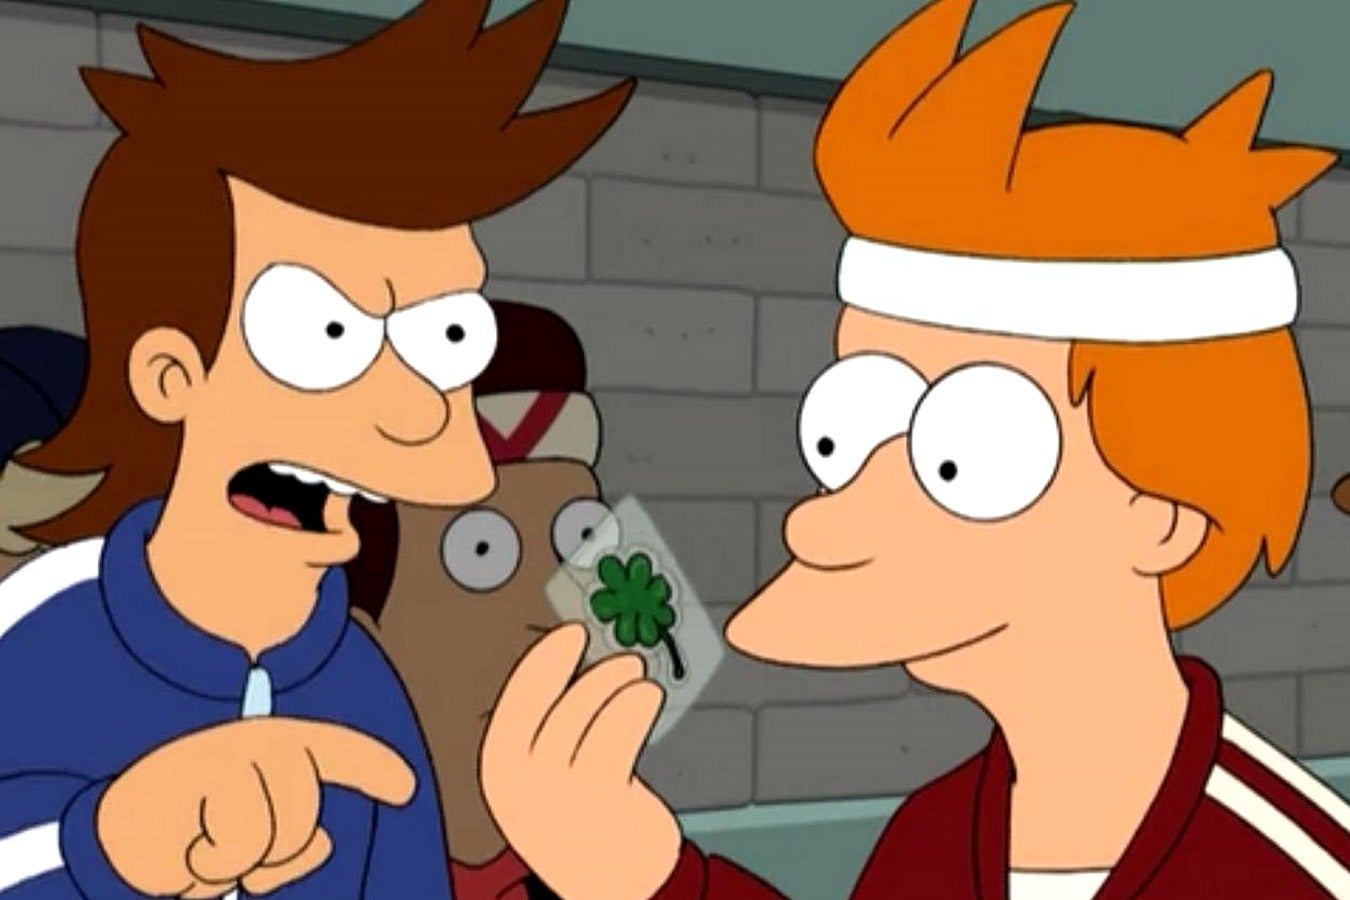 Fry admires a four-leaf clover while another person in a tracksuit points at him intensely.